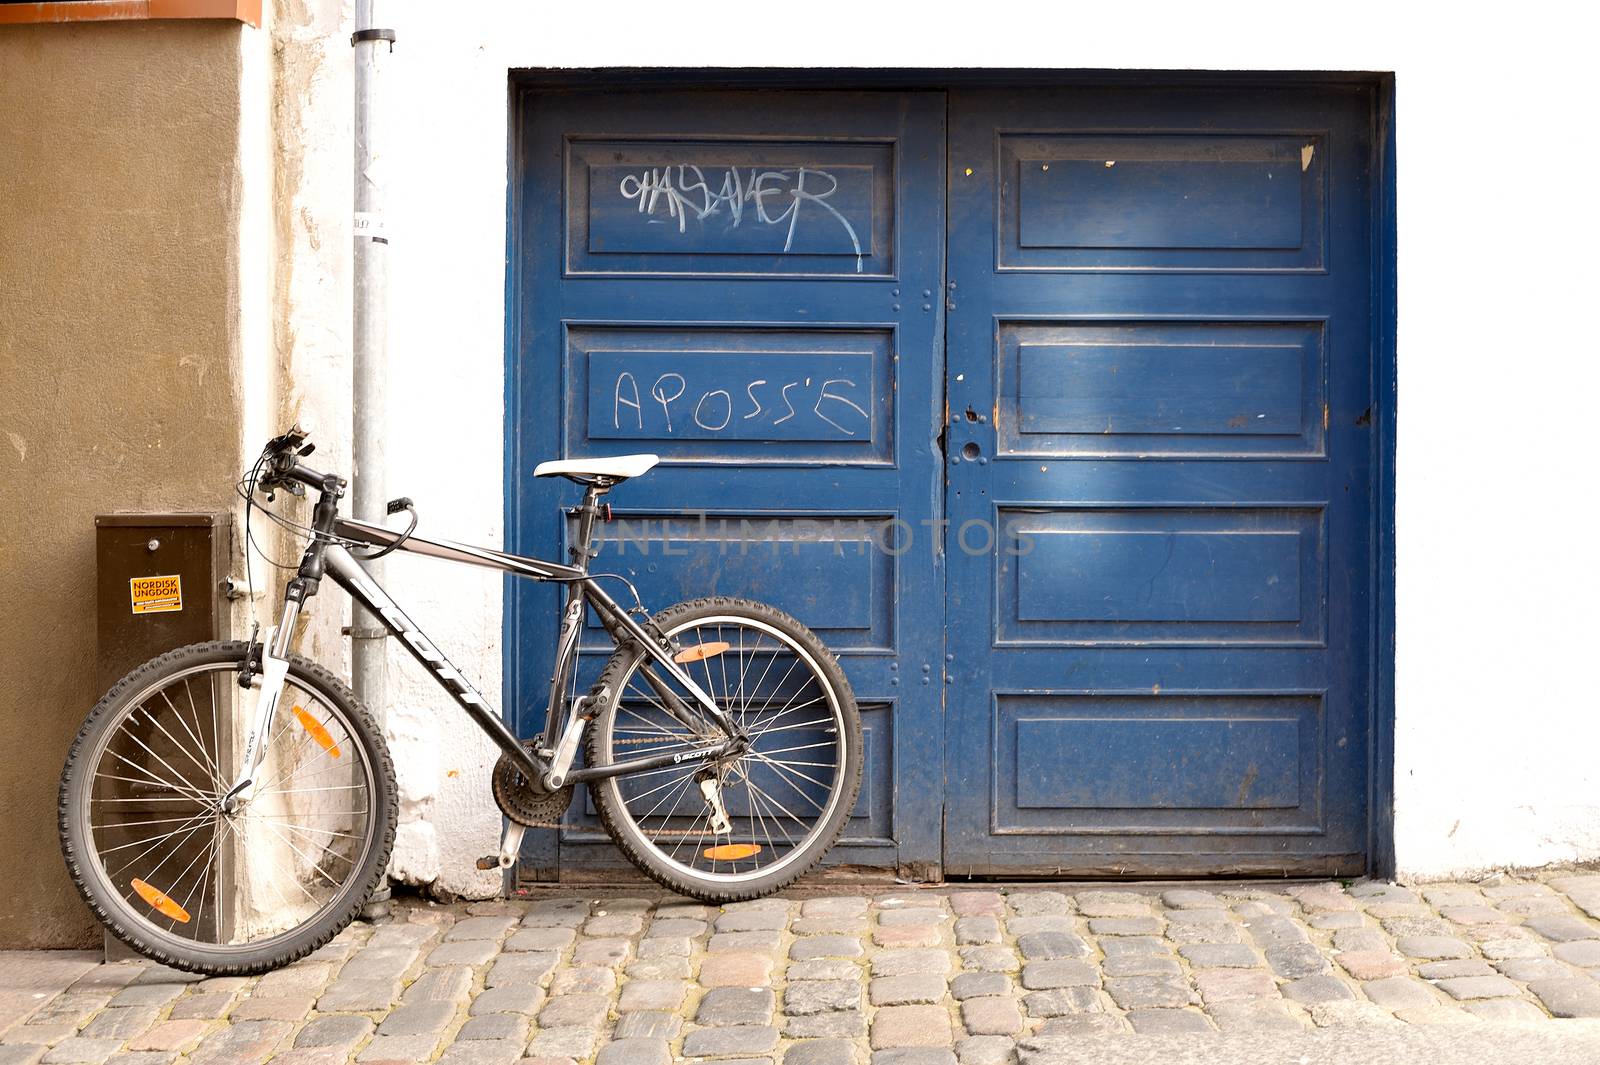 Graffiti Painted Garage Door With a Bicycle Leaning Against Skag by Whiteboxmedia